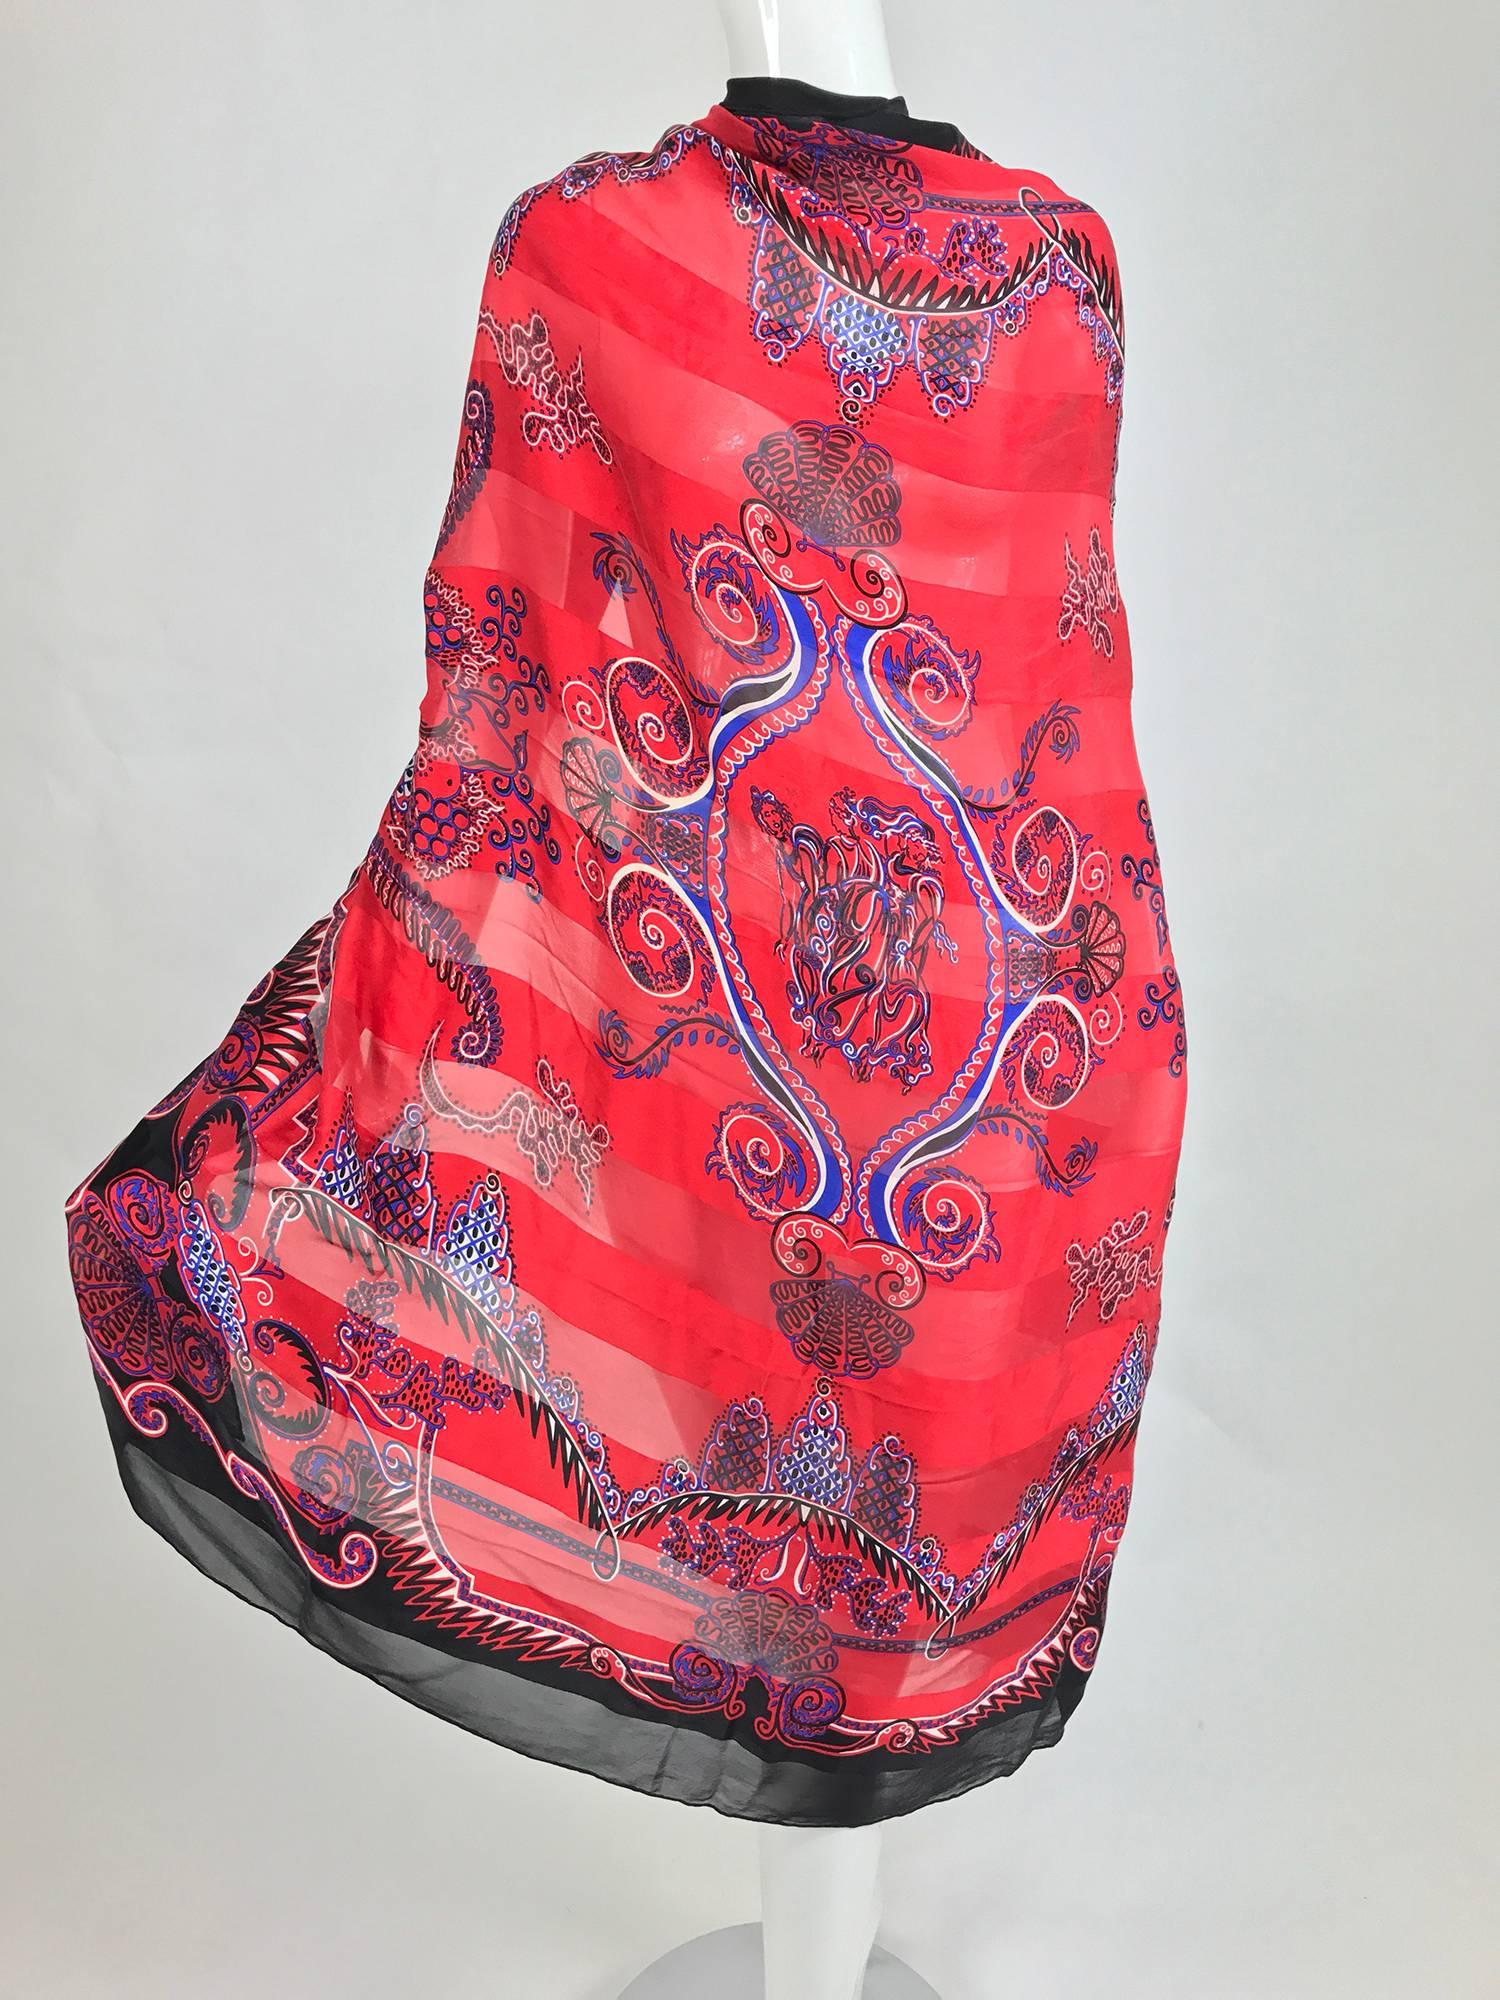 Zandra Rhodes large silk scarf/shawl the chiffon is matte woven with a wide satin stripe, the ground is red with a black border and a print in purple, black and white...The center features the three graces...Signed, with tag marked silk made in